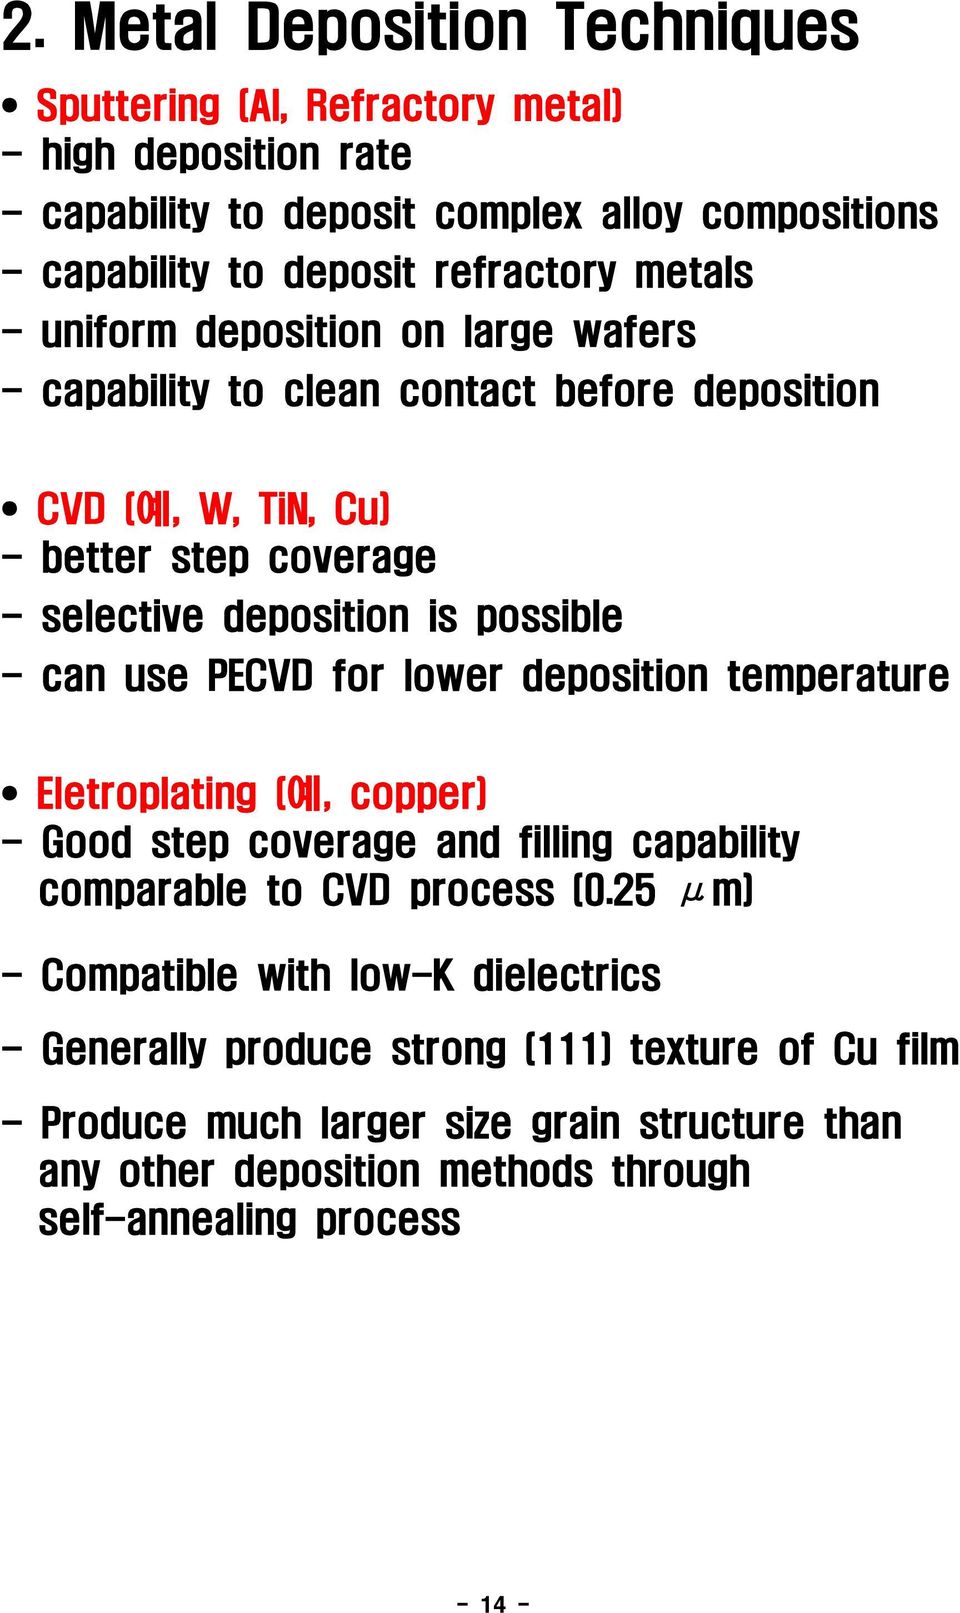 use PECVD for lower deposition temperature Eletroplating (예, copper) - Good step coverage and filling capability comparable to CVD process (0.